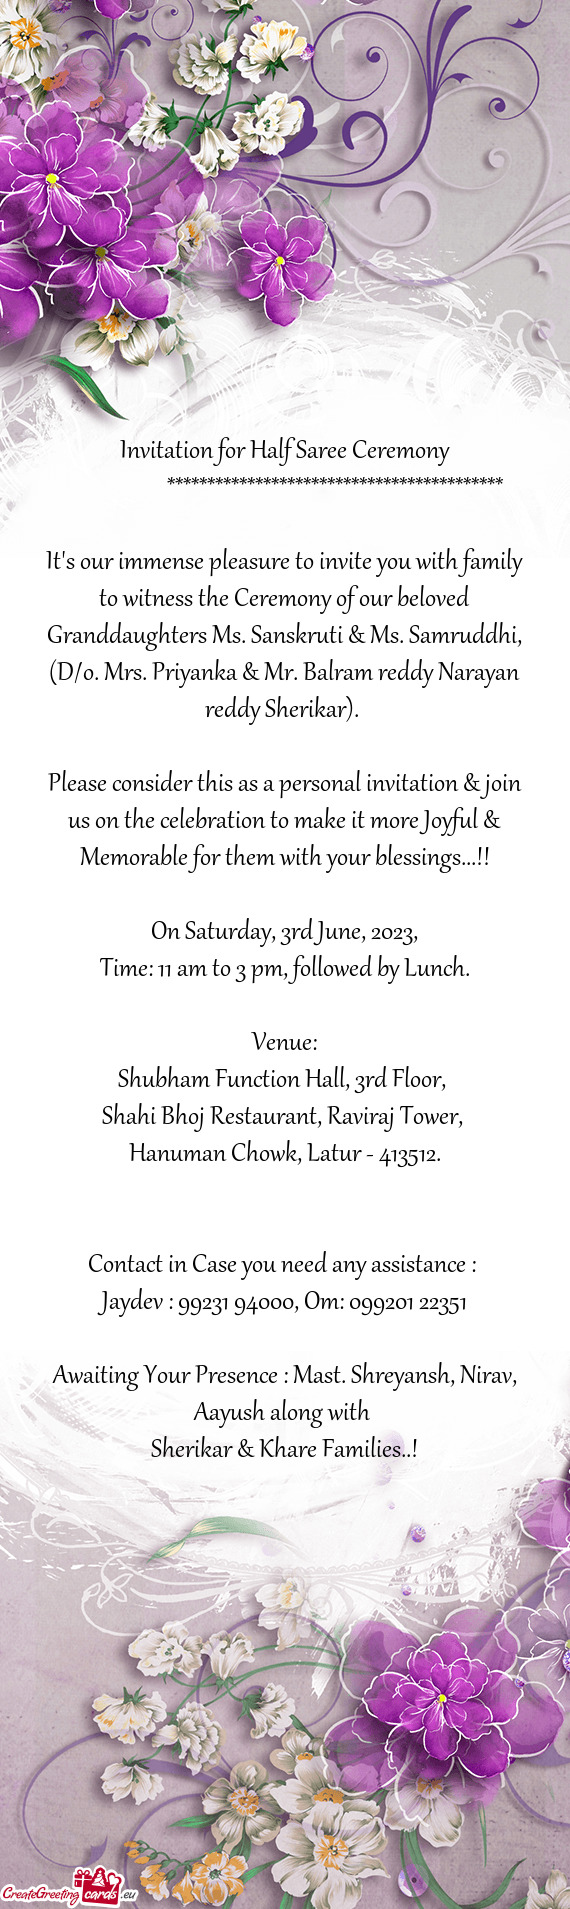 Please consider this as a personal invitation & join us on the celebration to make it more Joyful &